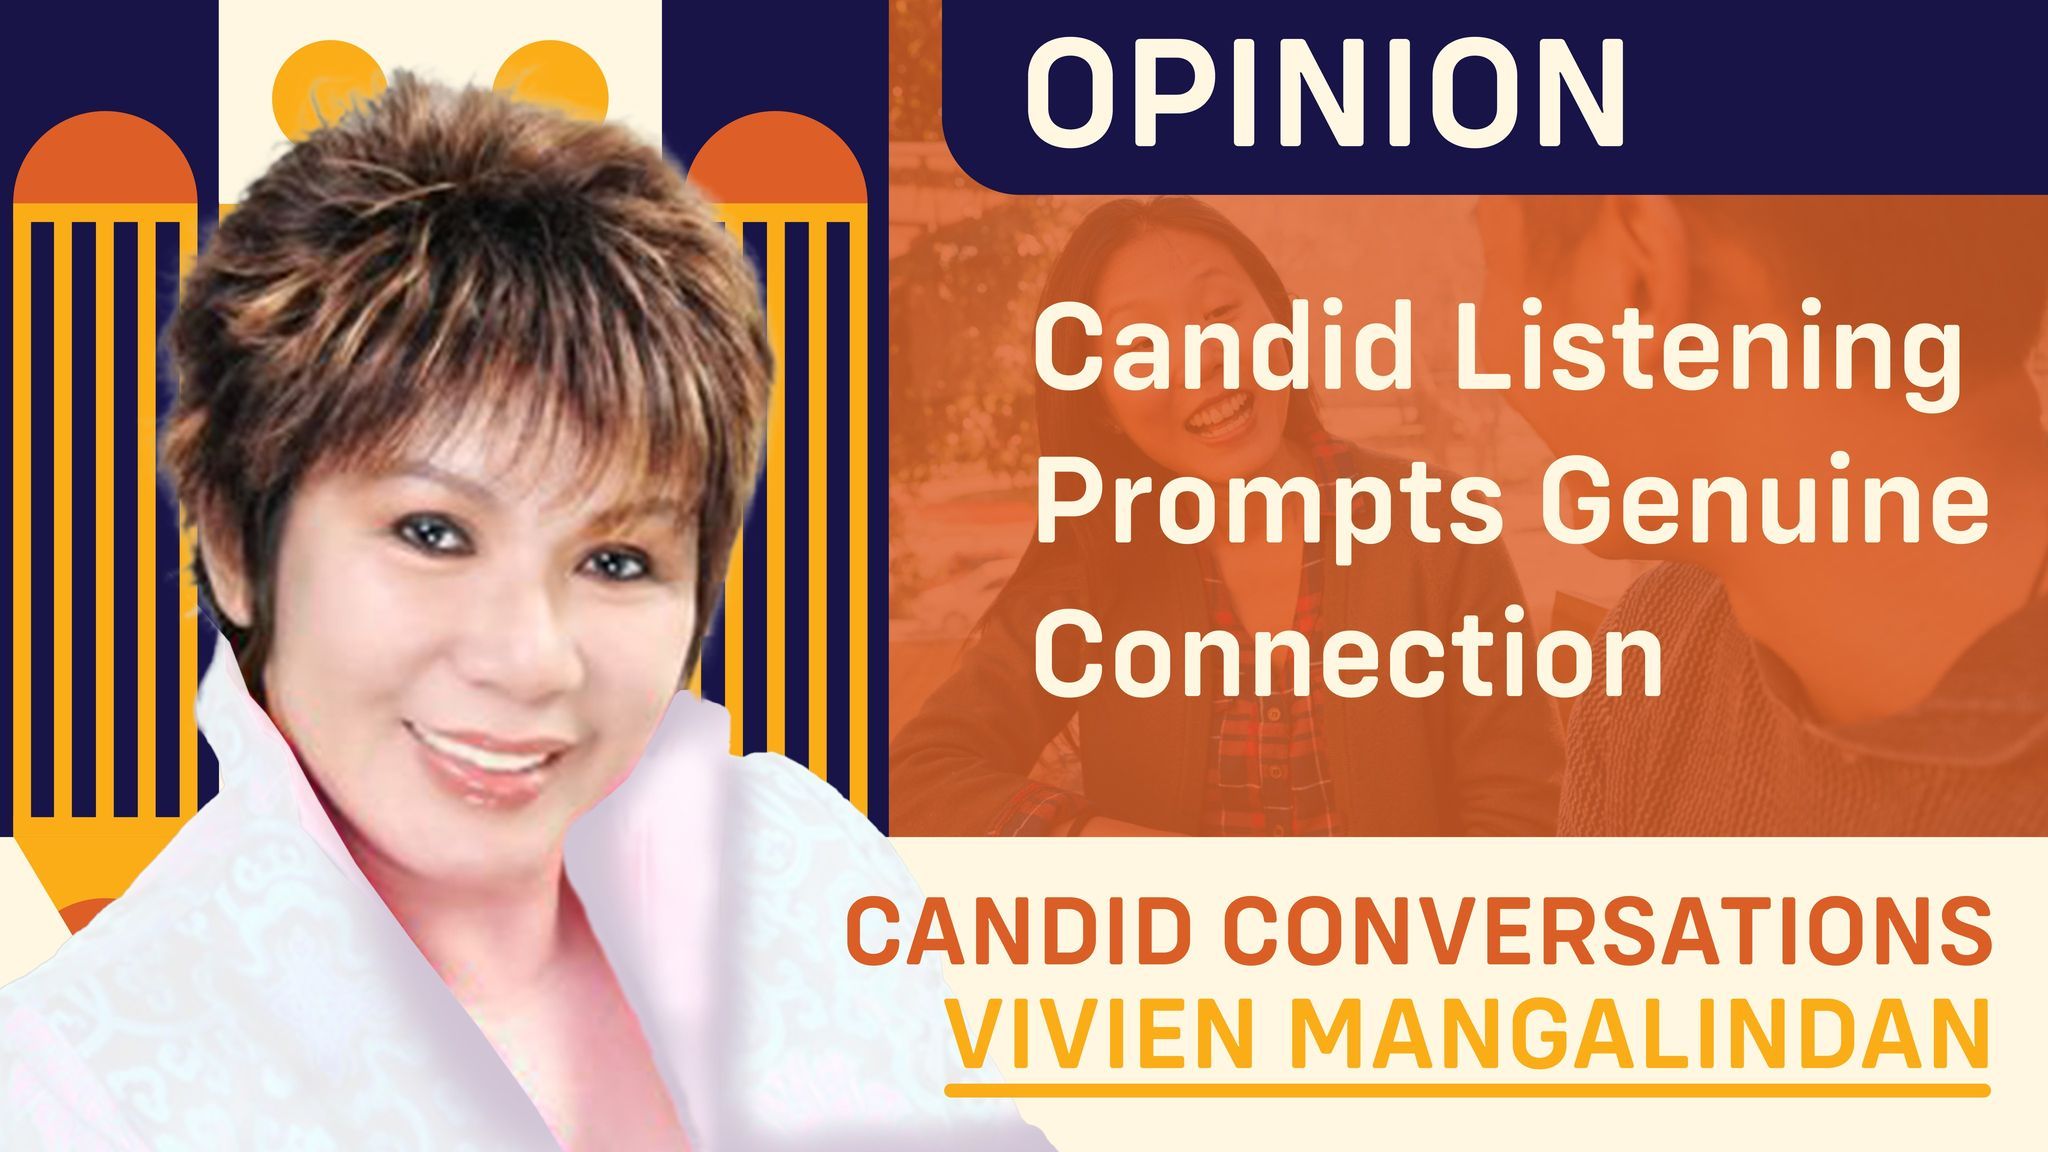 Candid Listening Prompts Genuine Connection